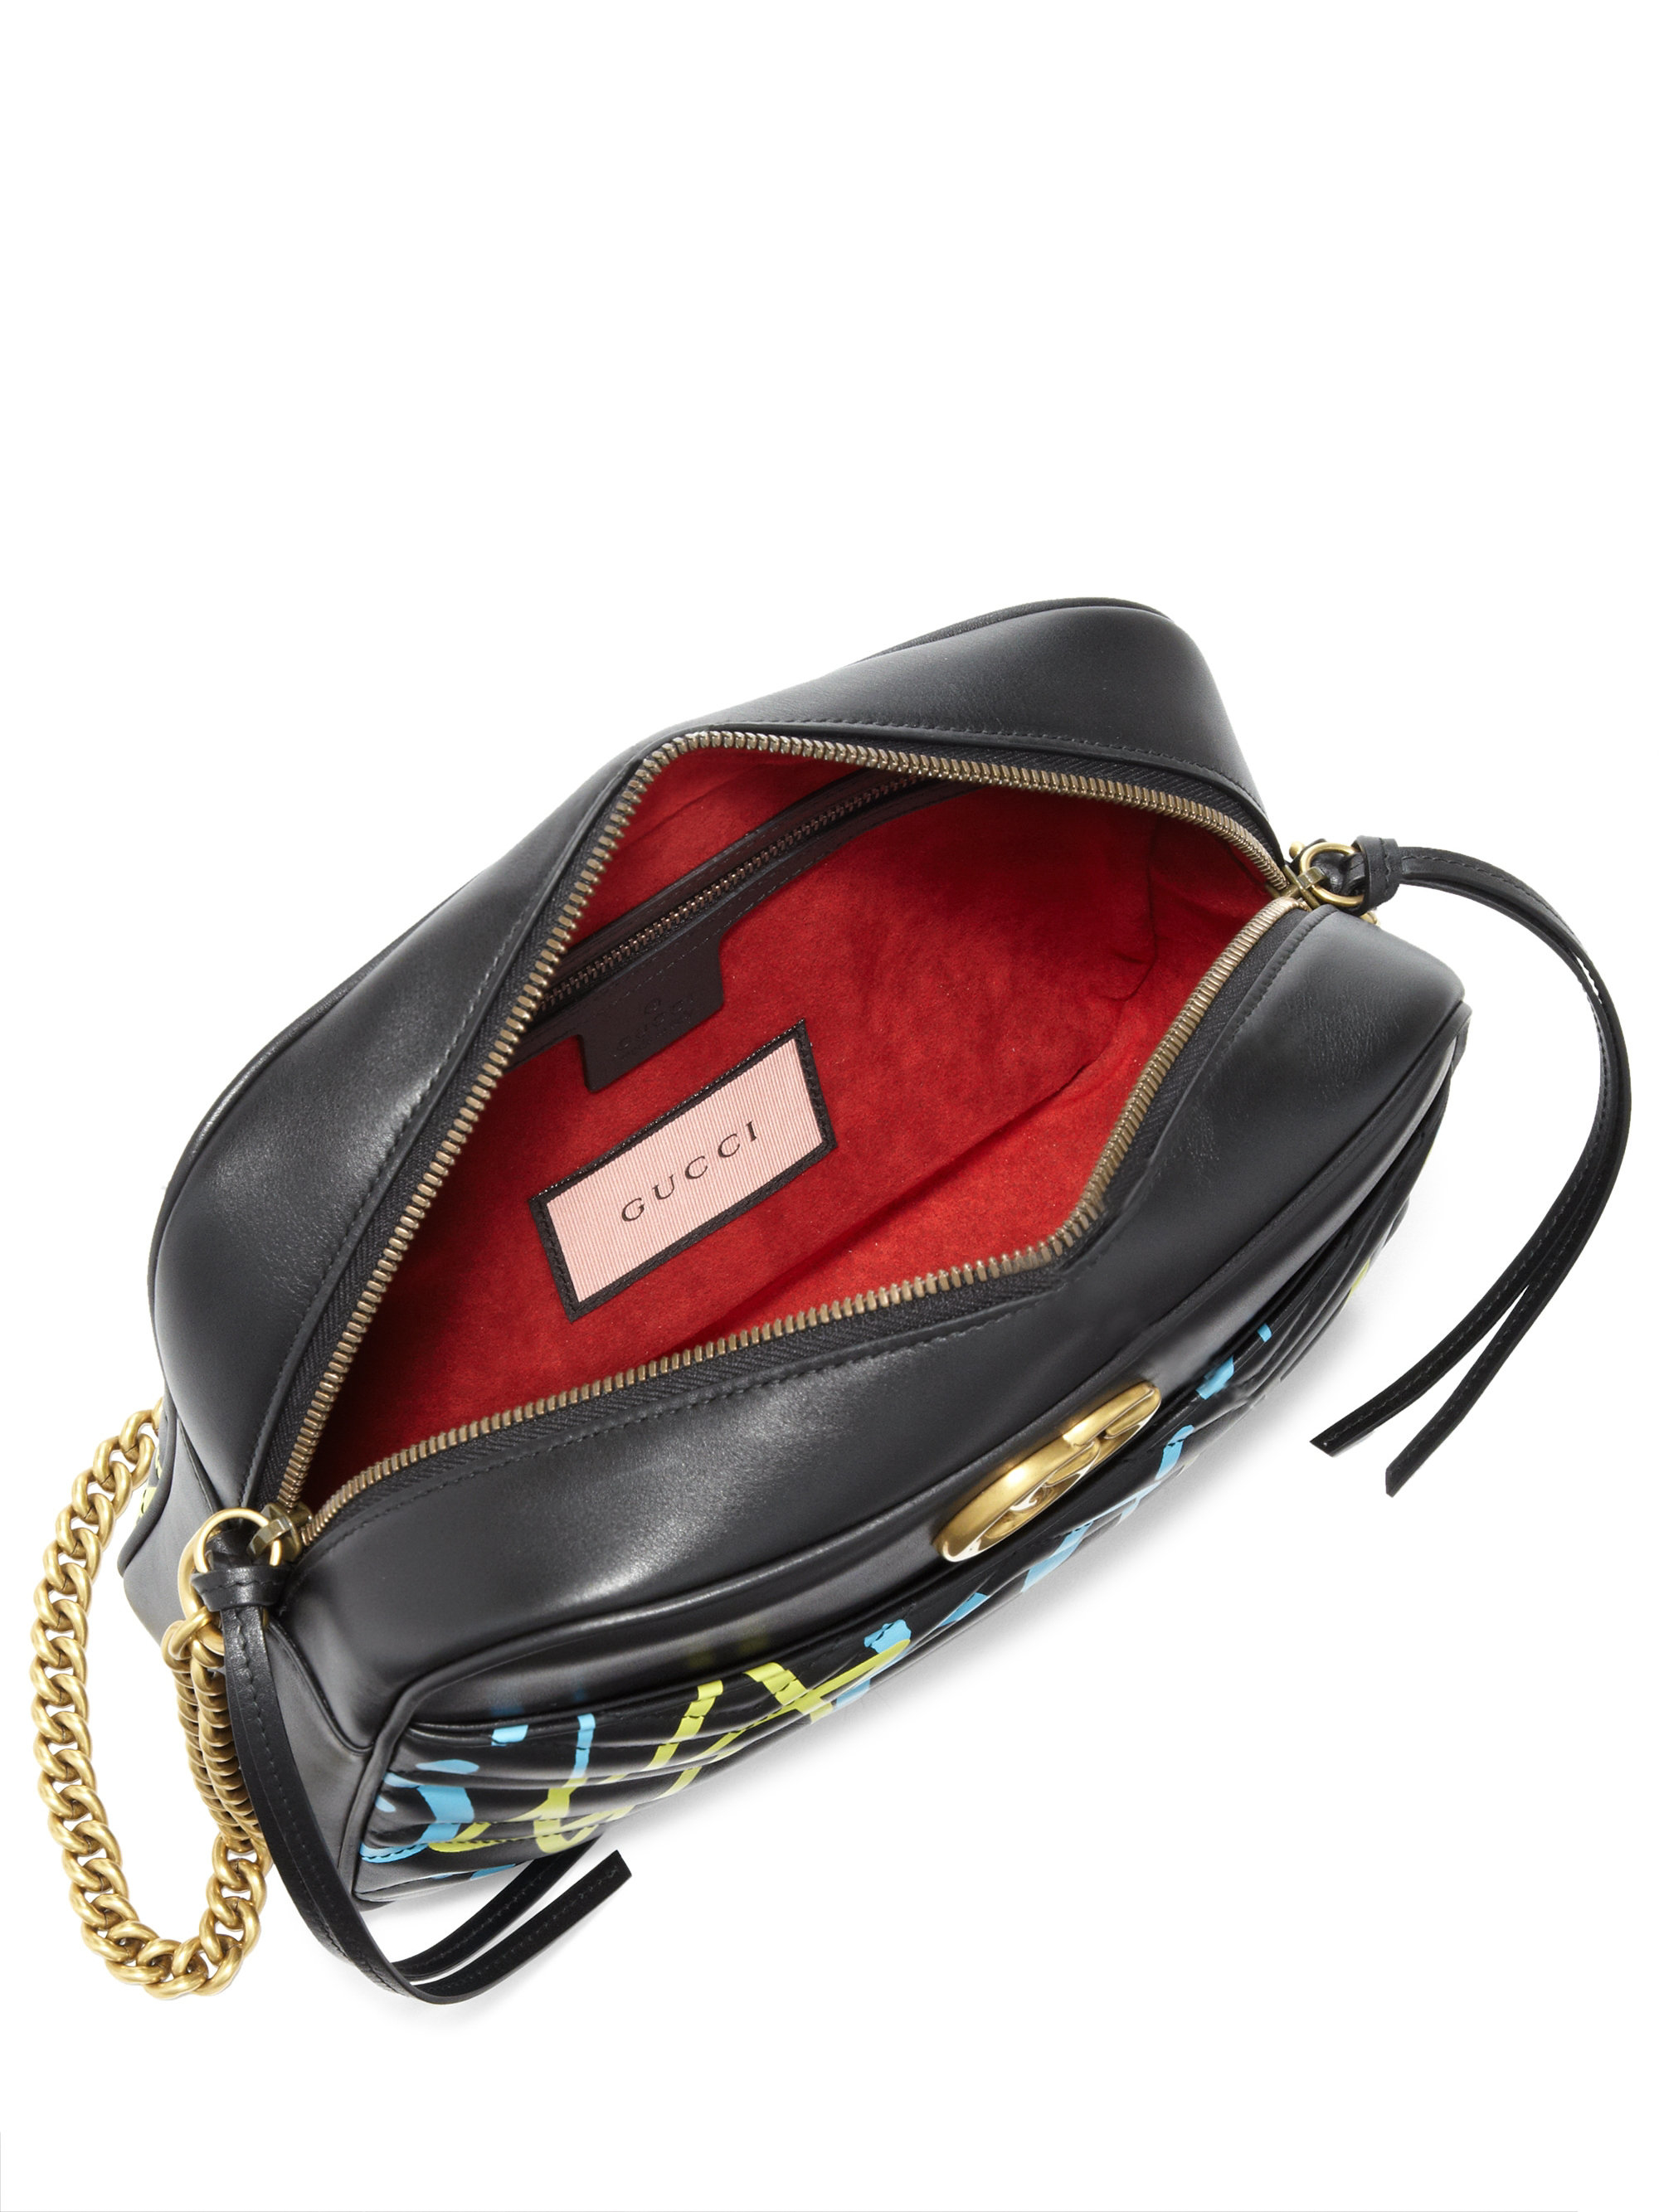 Gucci Ghost GG Marmont Matelassé Leather Shoulder Bag in Black - Lyst